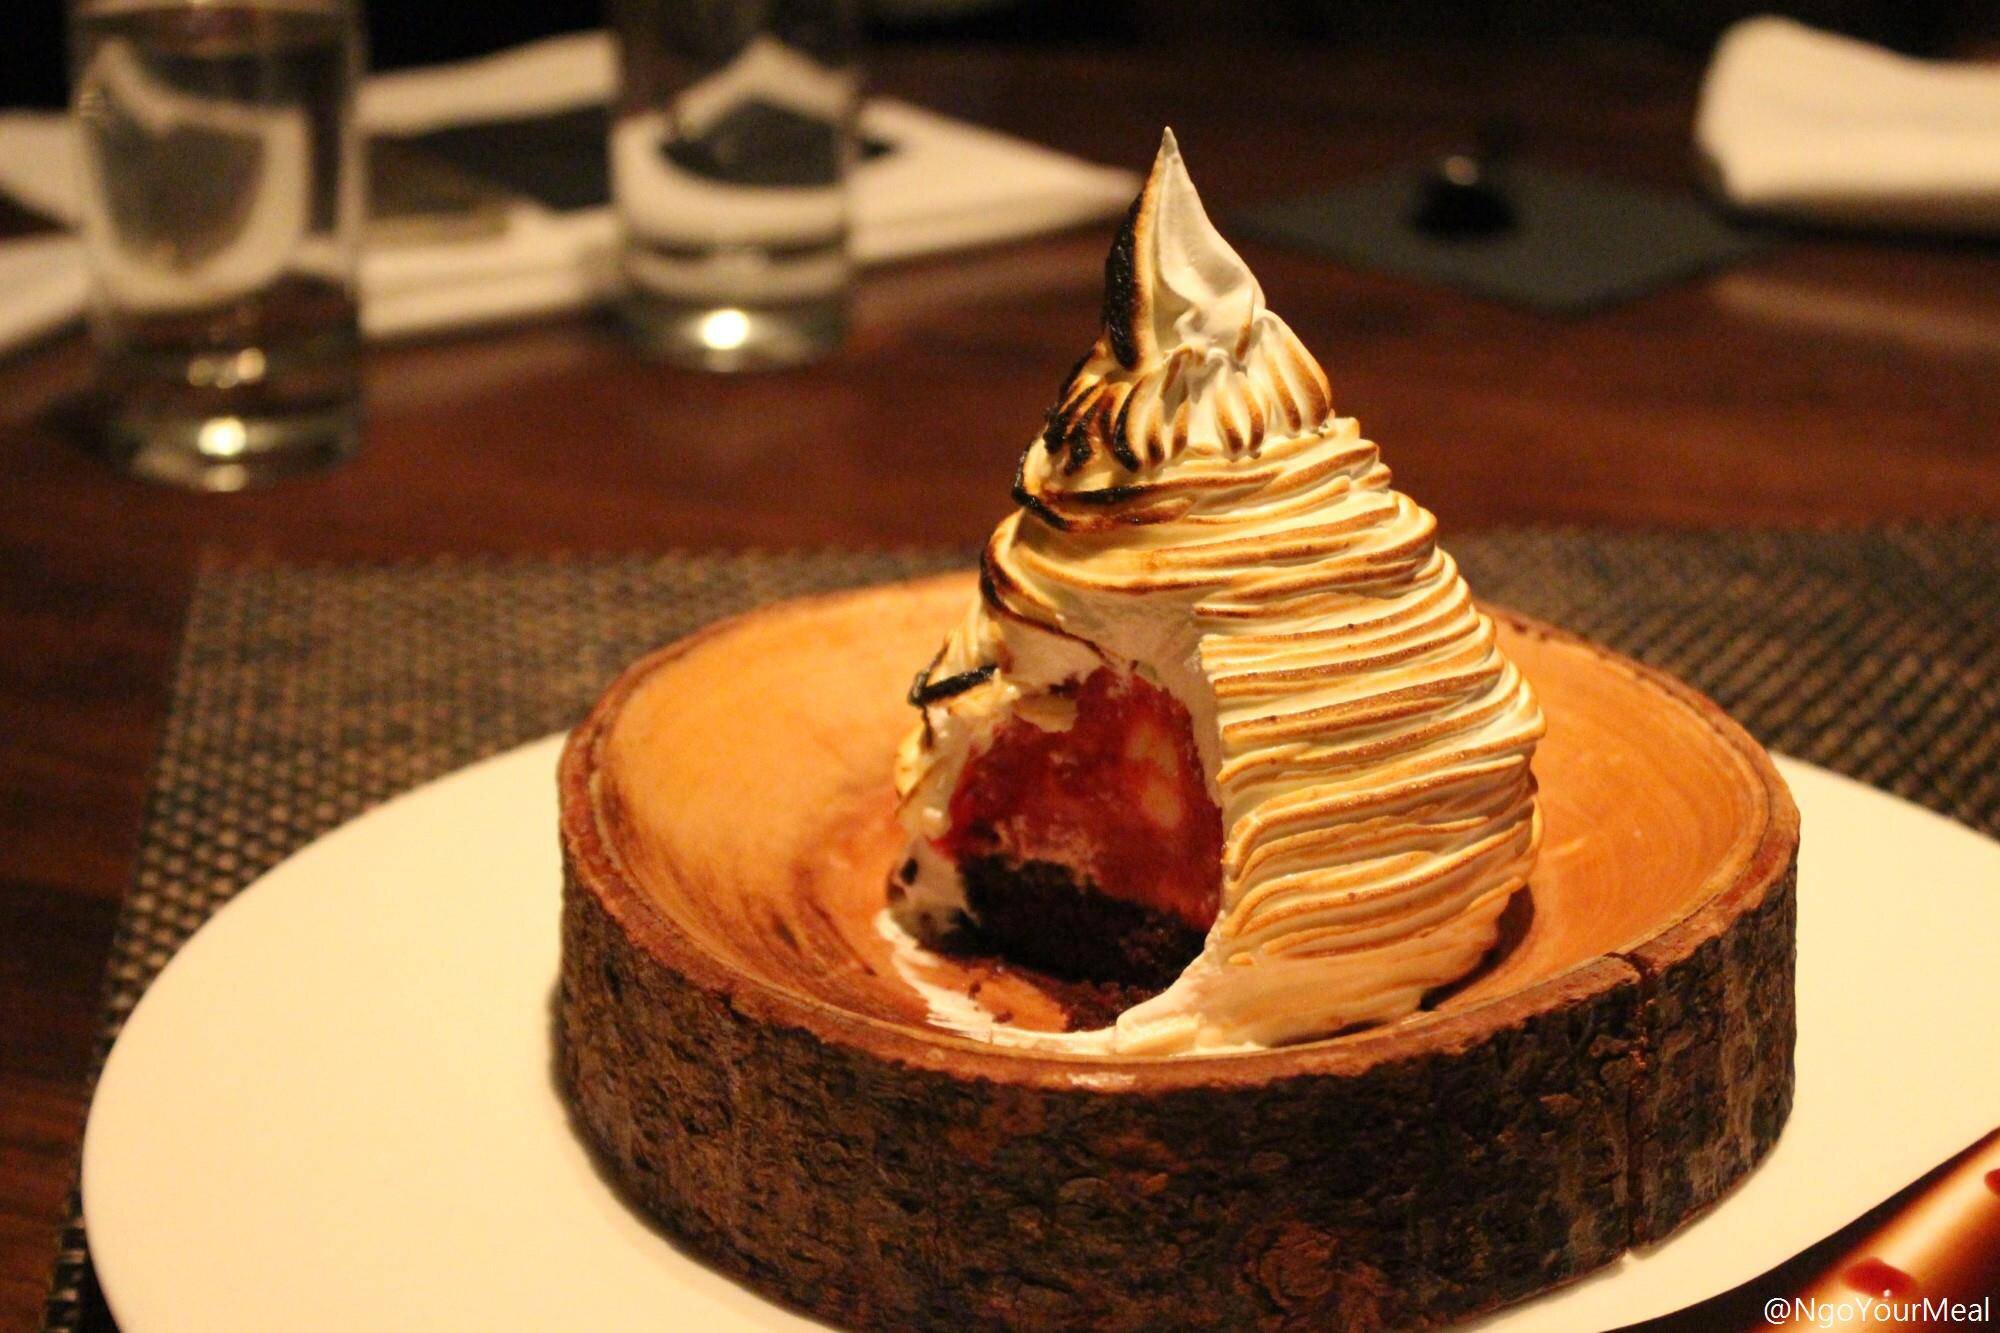 BFBA (Black Forest Baked Alaska) at Gaonnuri in New York City